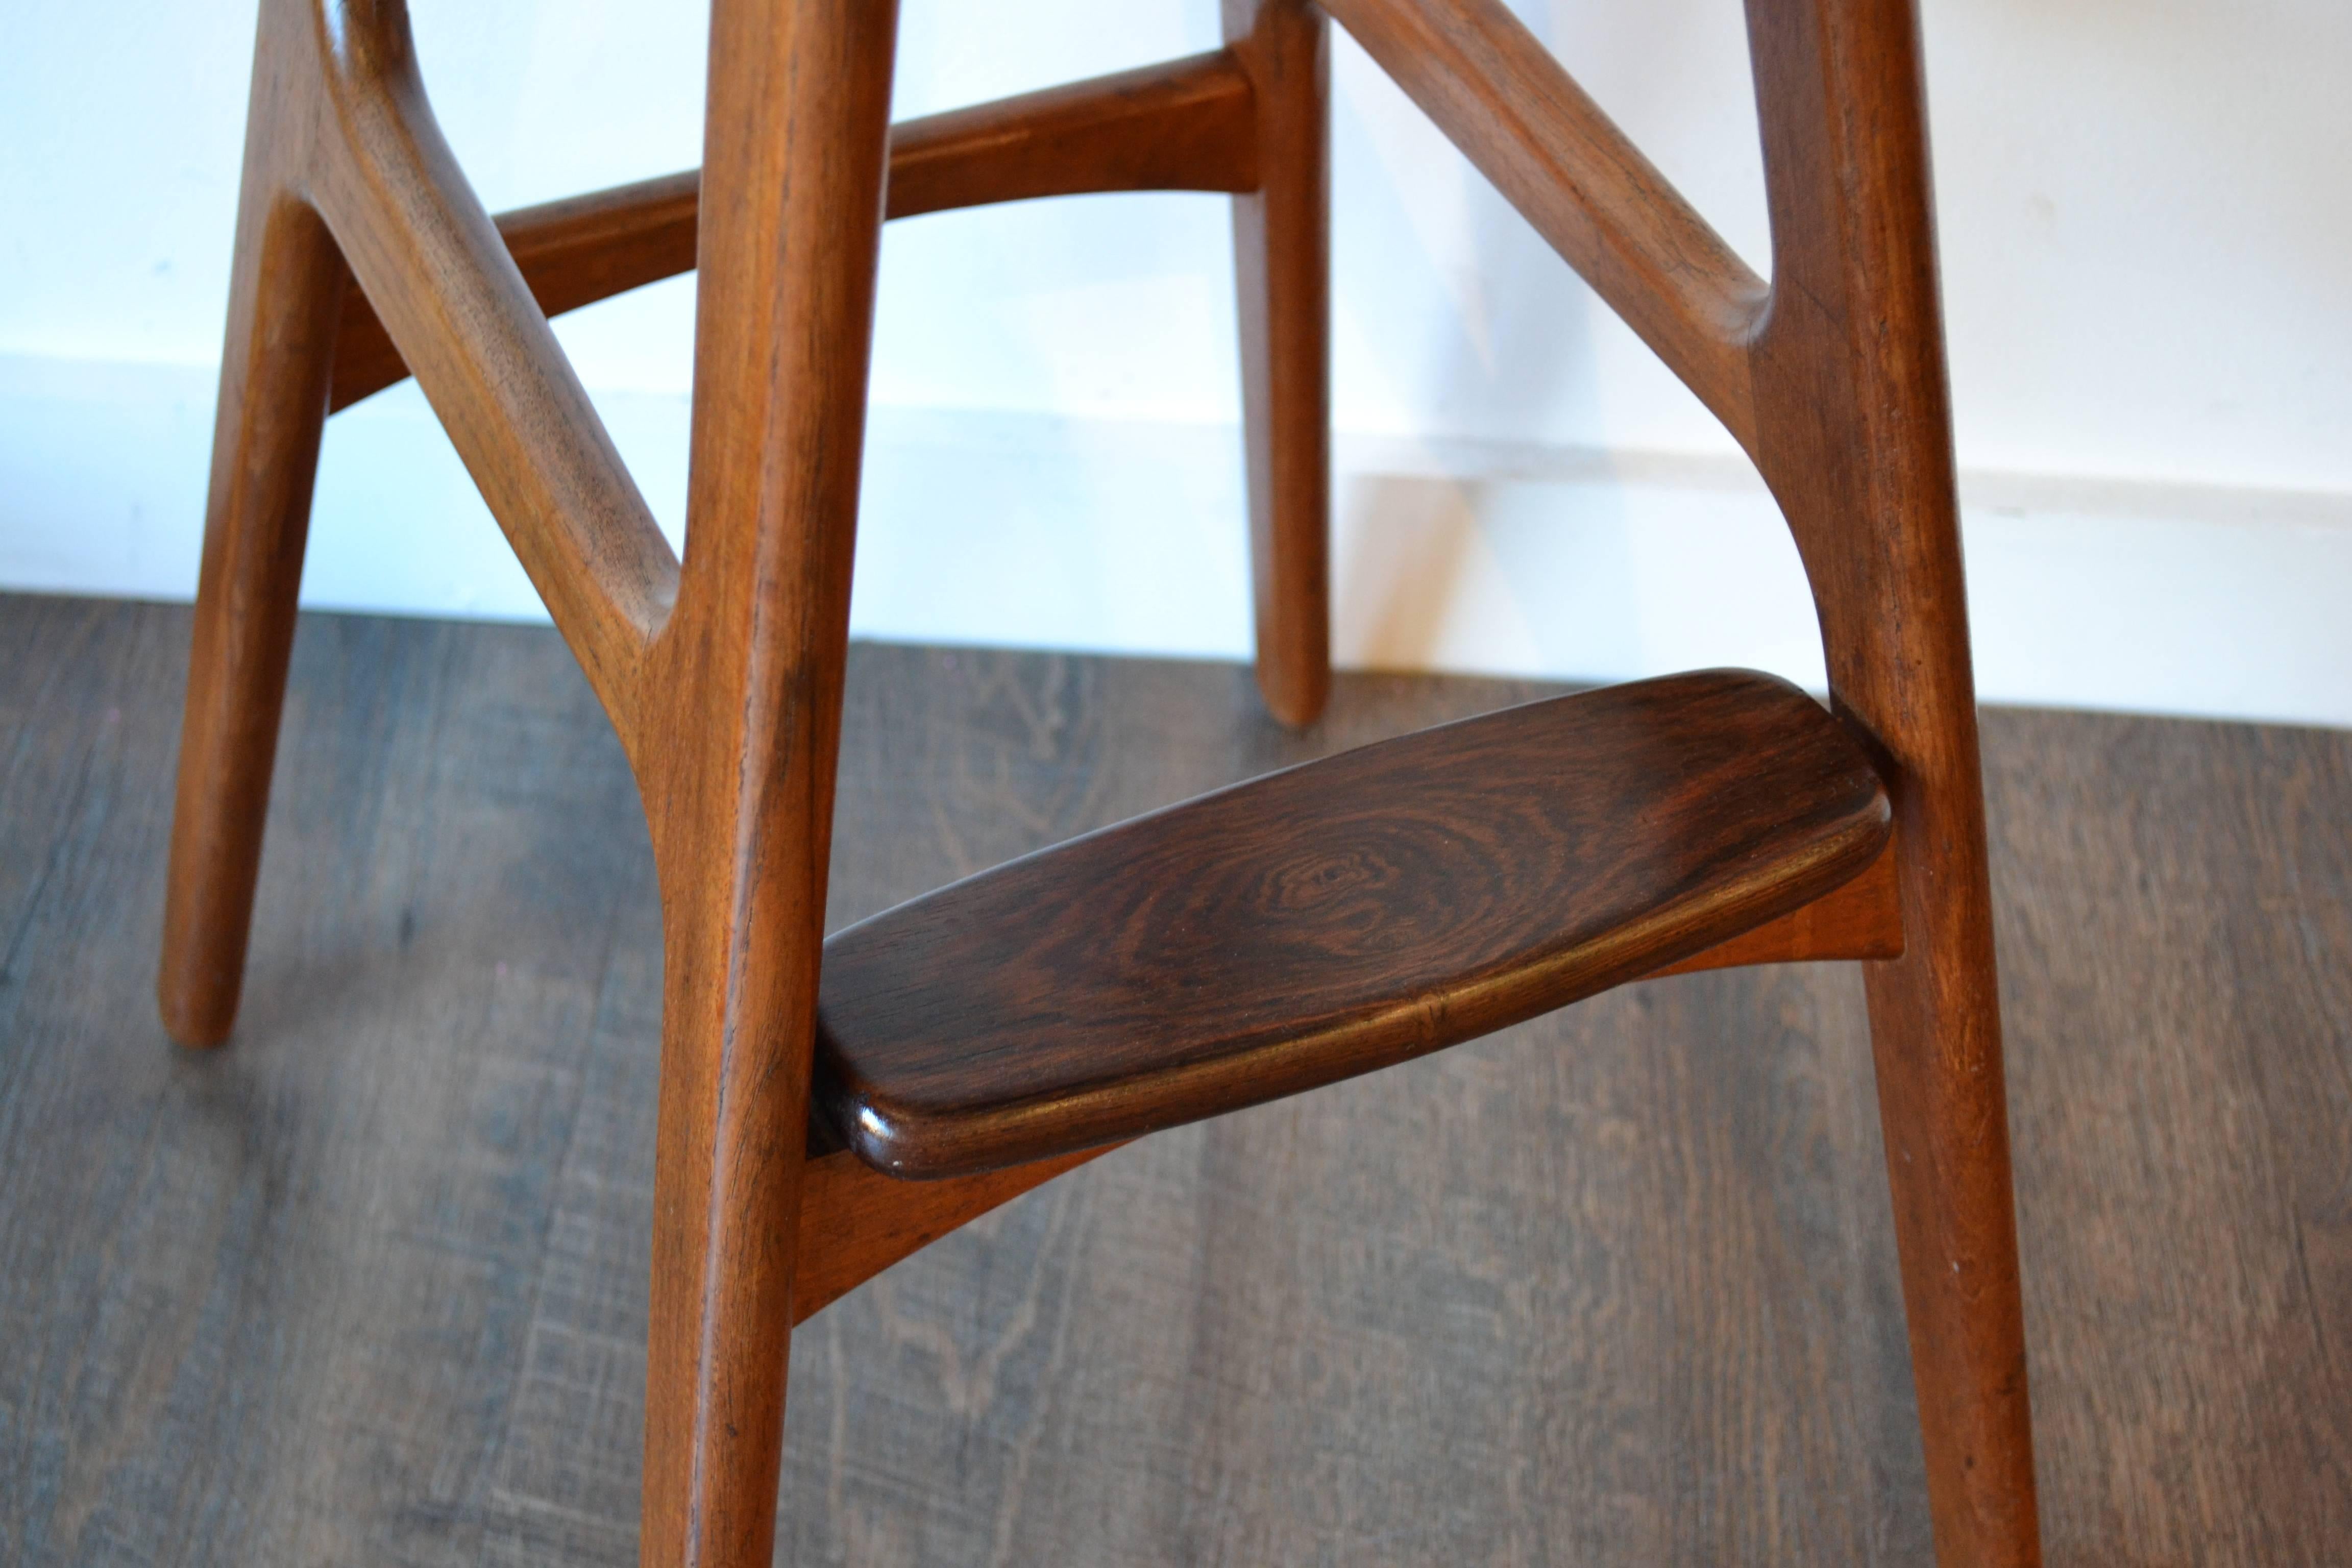 Iconic bar stool designed by Erik Buch, Denmark 1970s, teak frame with rosewood footrest, original leather seat.